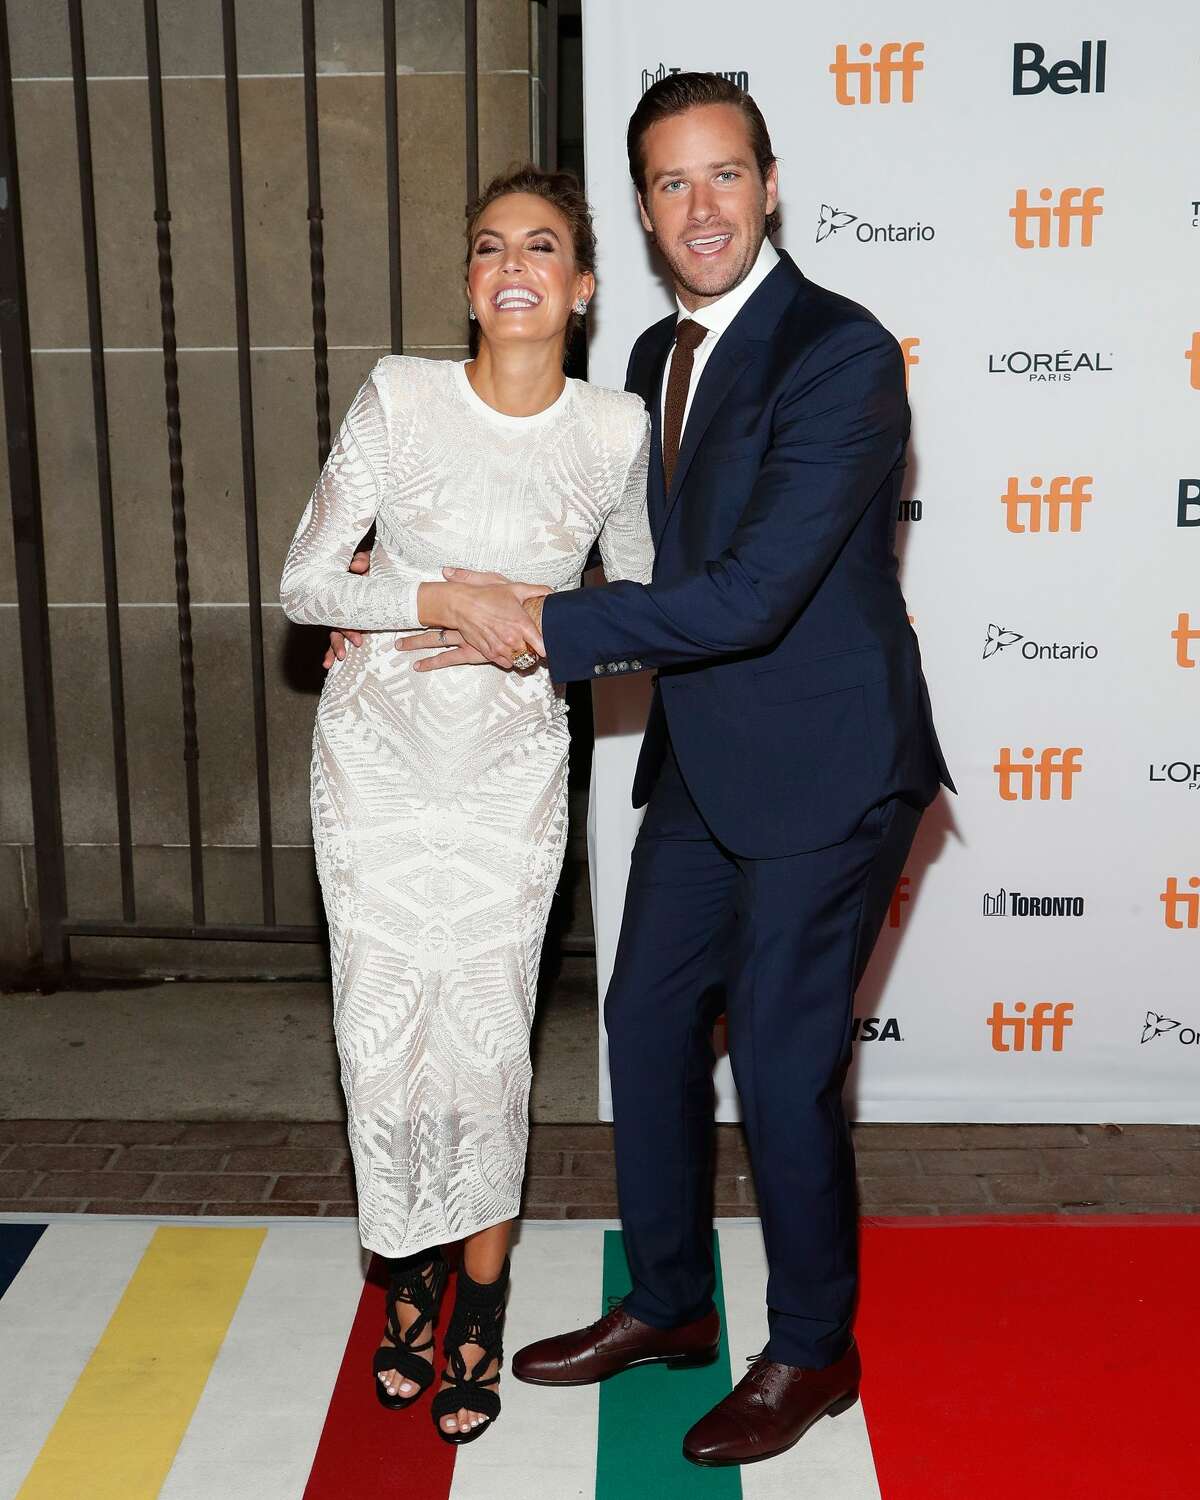 Hollywood couple and San Antonio residents, Elizabeth Chambers and Armie Hammer, who co-own Bird Bakery in Alamo Heights, were all impish smiles over her latest baby bump during the world premiere of 'Free Fire' during the 2016 Toronto International Film Festival at Ryerson Theatre on September 7, 2016 in Toronto, Canada. (Photo by Taylor Hill/FilmMagic)